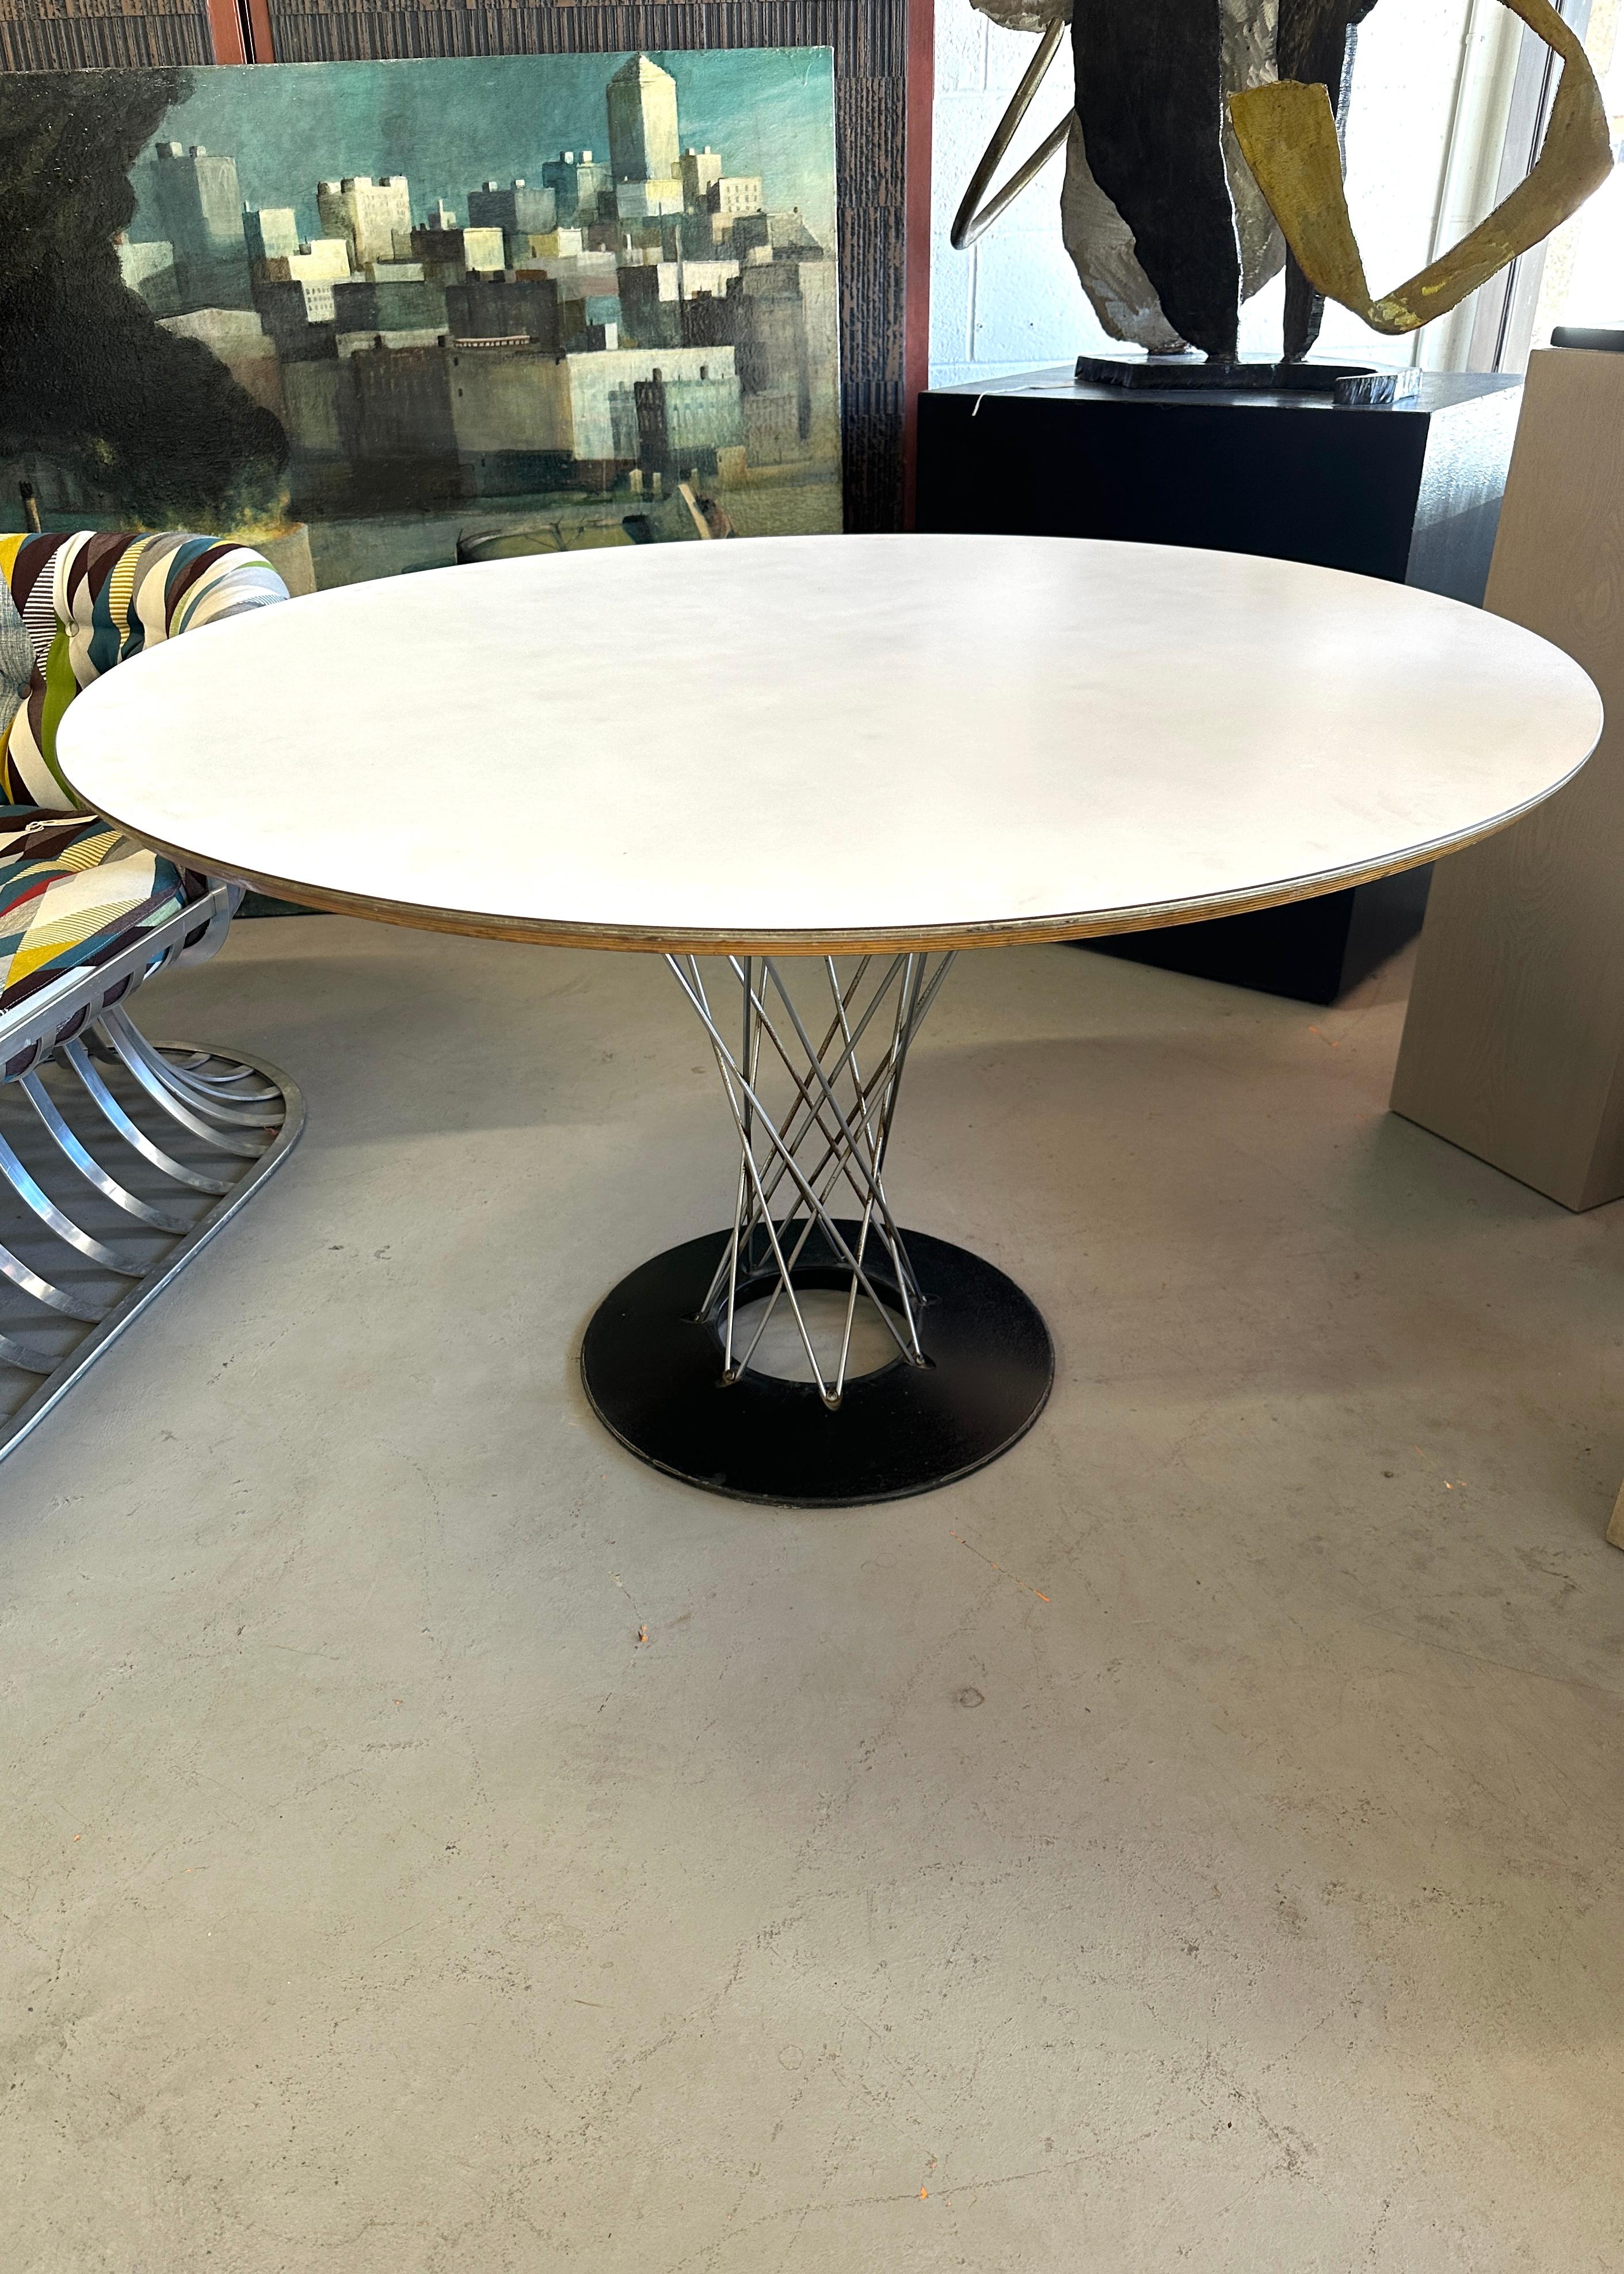 A nice example of a vintage 1960’s Isamu Noguchi Cyclone table for Knoll with 320 Park Avenue label underneath.  This table is a shade under 48 inches in diameter and Knoll no longer makes this size table. The Formica top is in good condition with